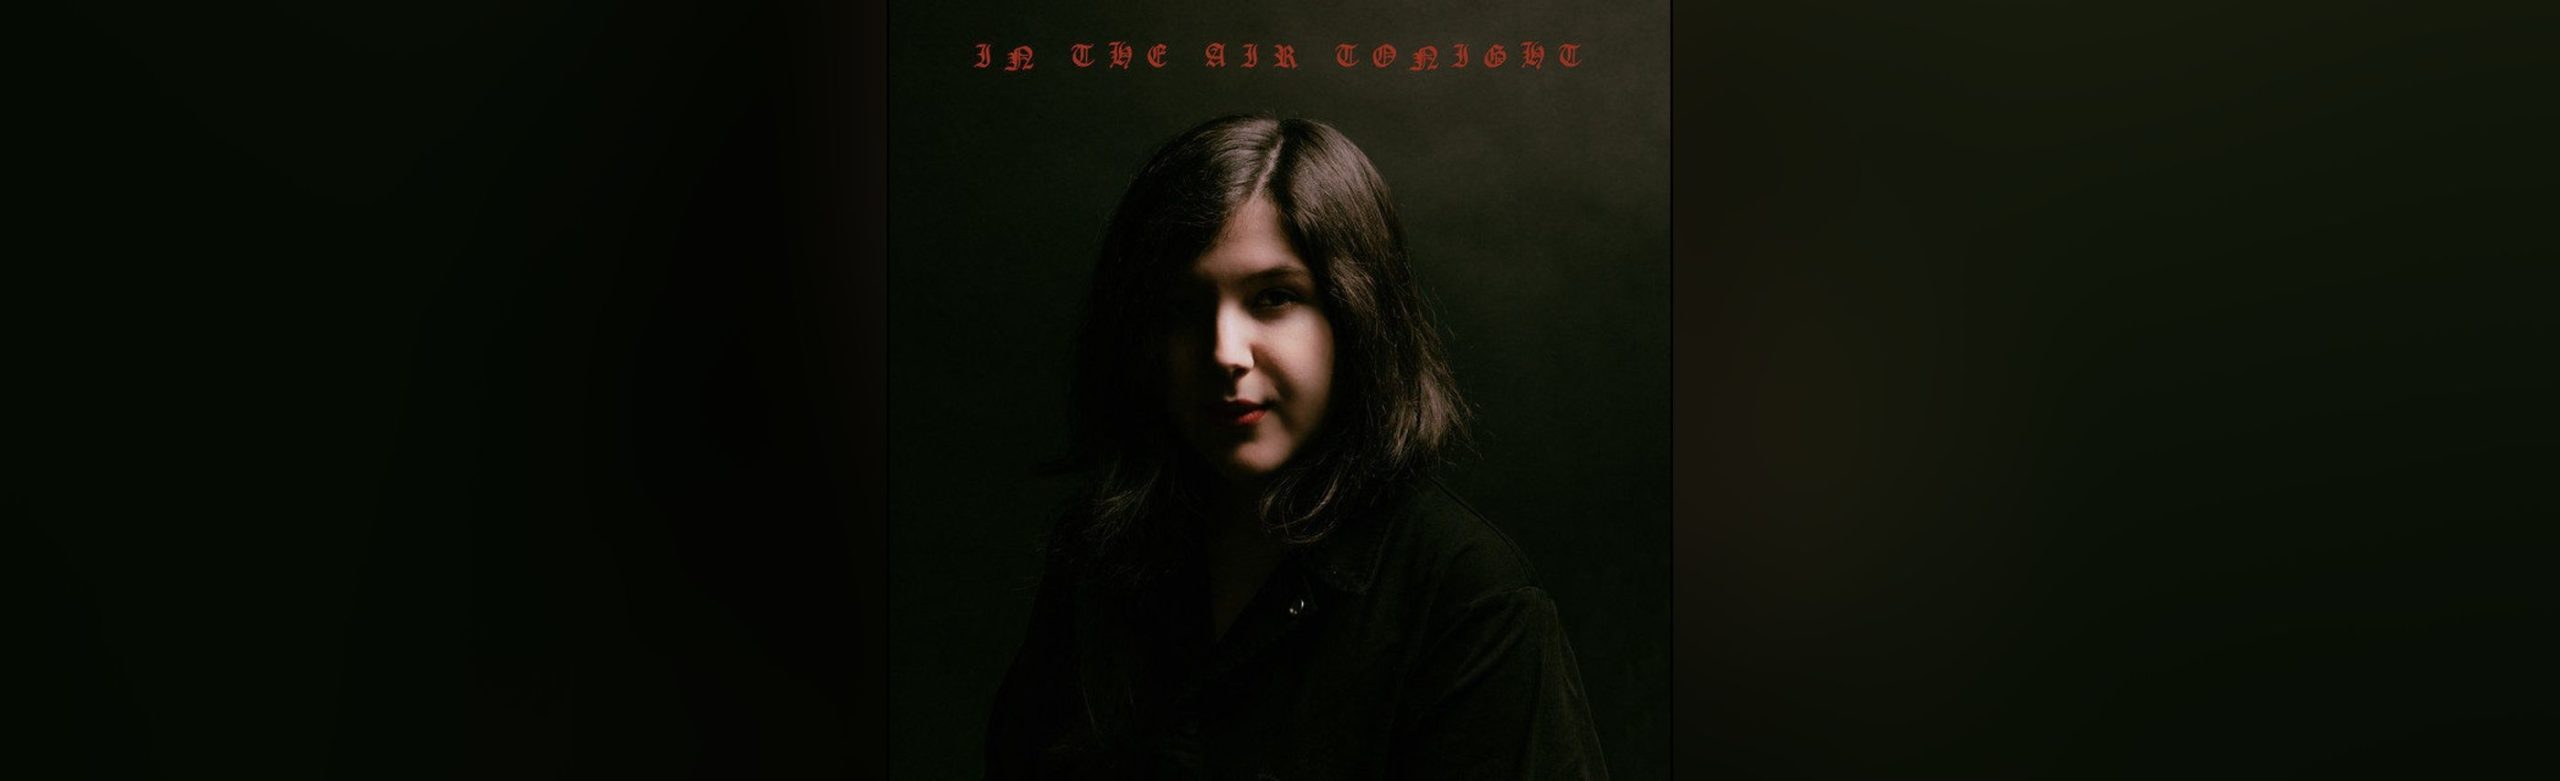 Lucy Dacus Gives Eerie Rendition of Phil Collins’ “In The Air Tonight” Image